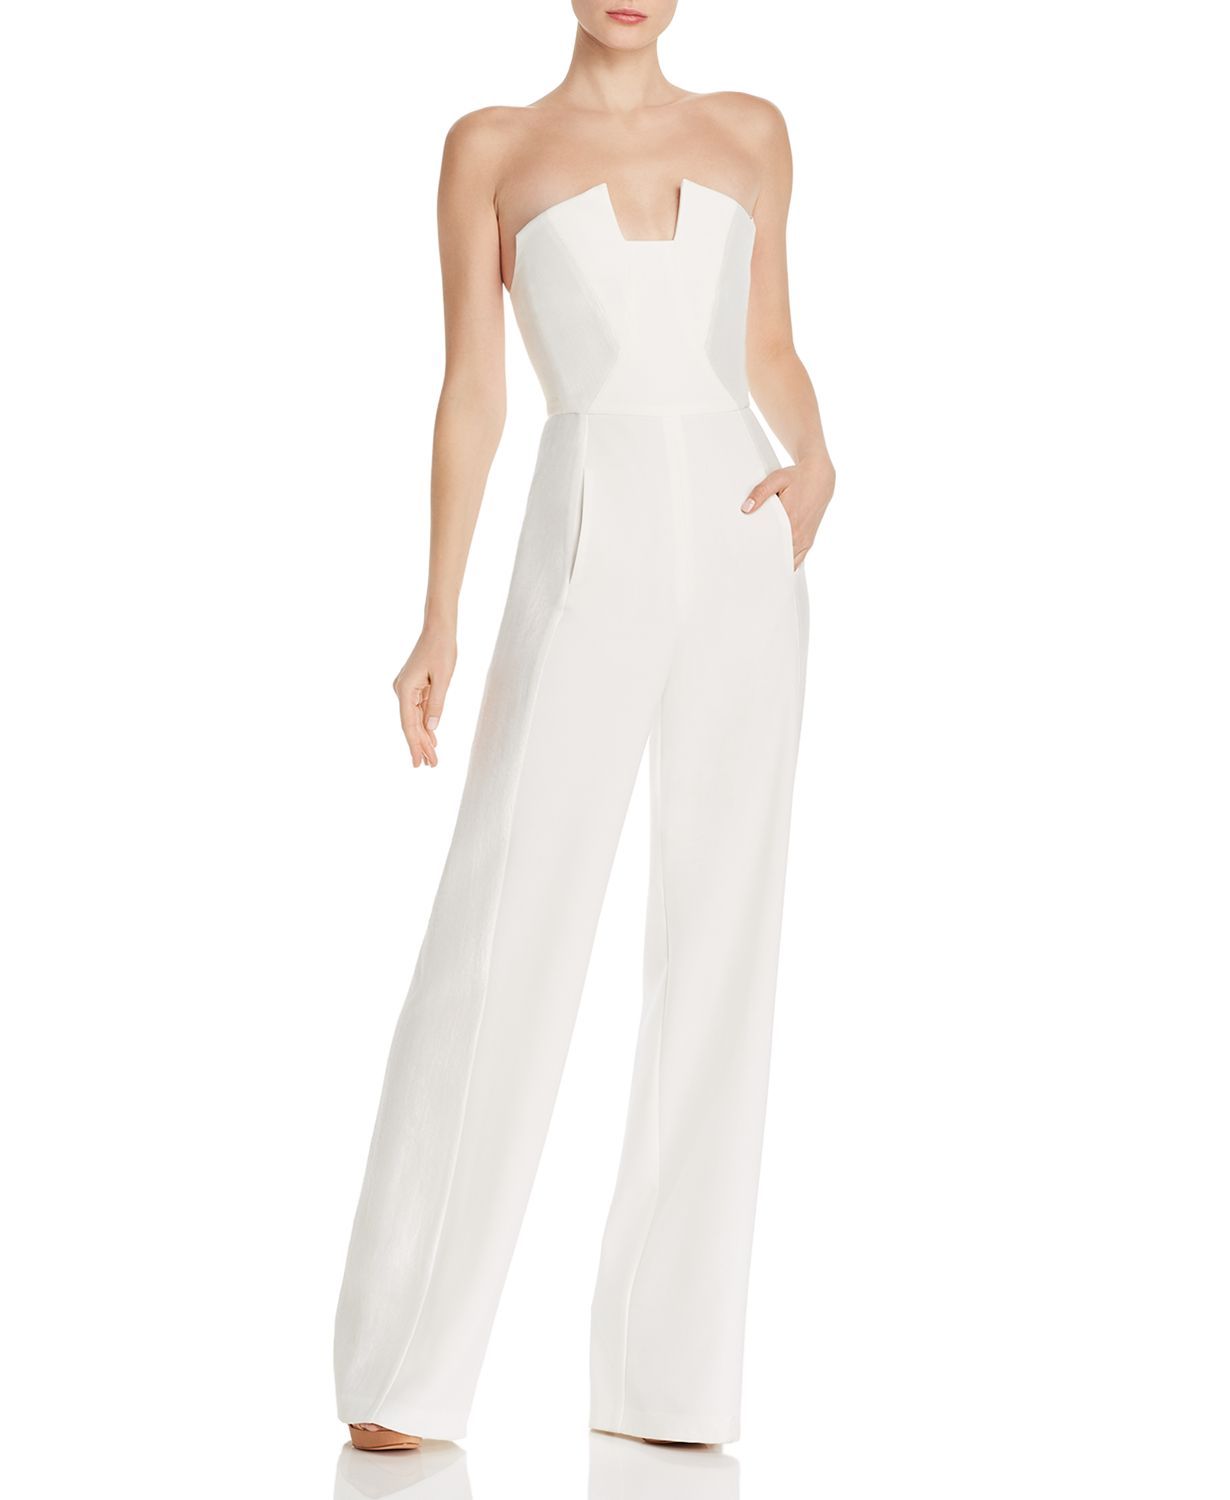 pants suits for cocktail parties